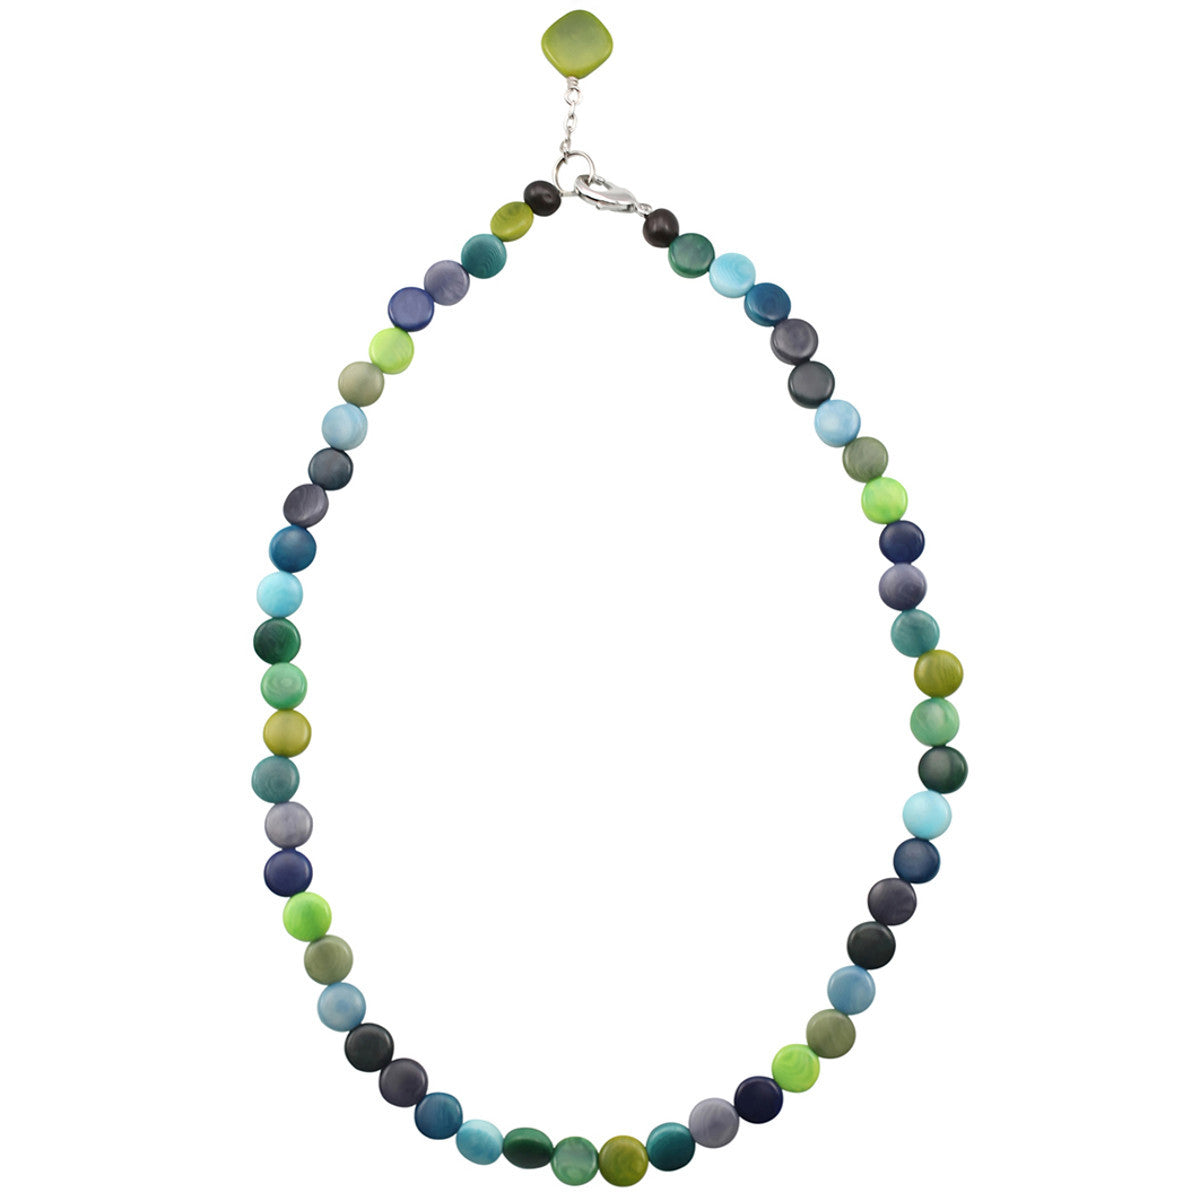 STATEMENT STRAND NECKLACE IN GREEN AND BLUE TONES